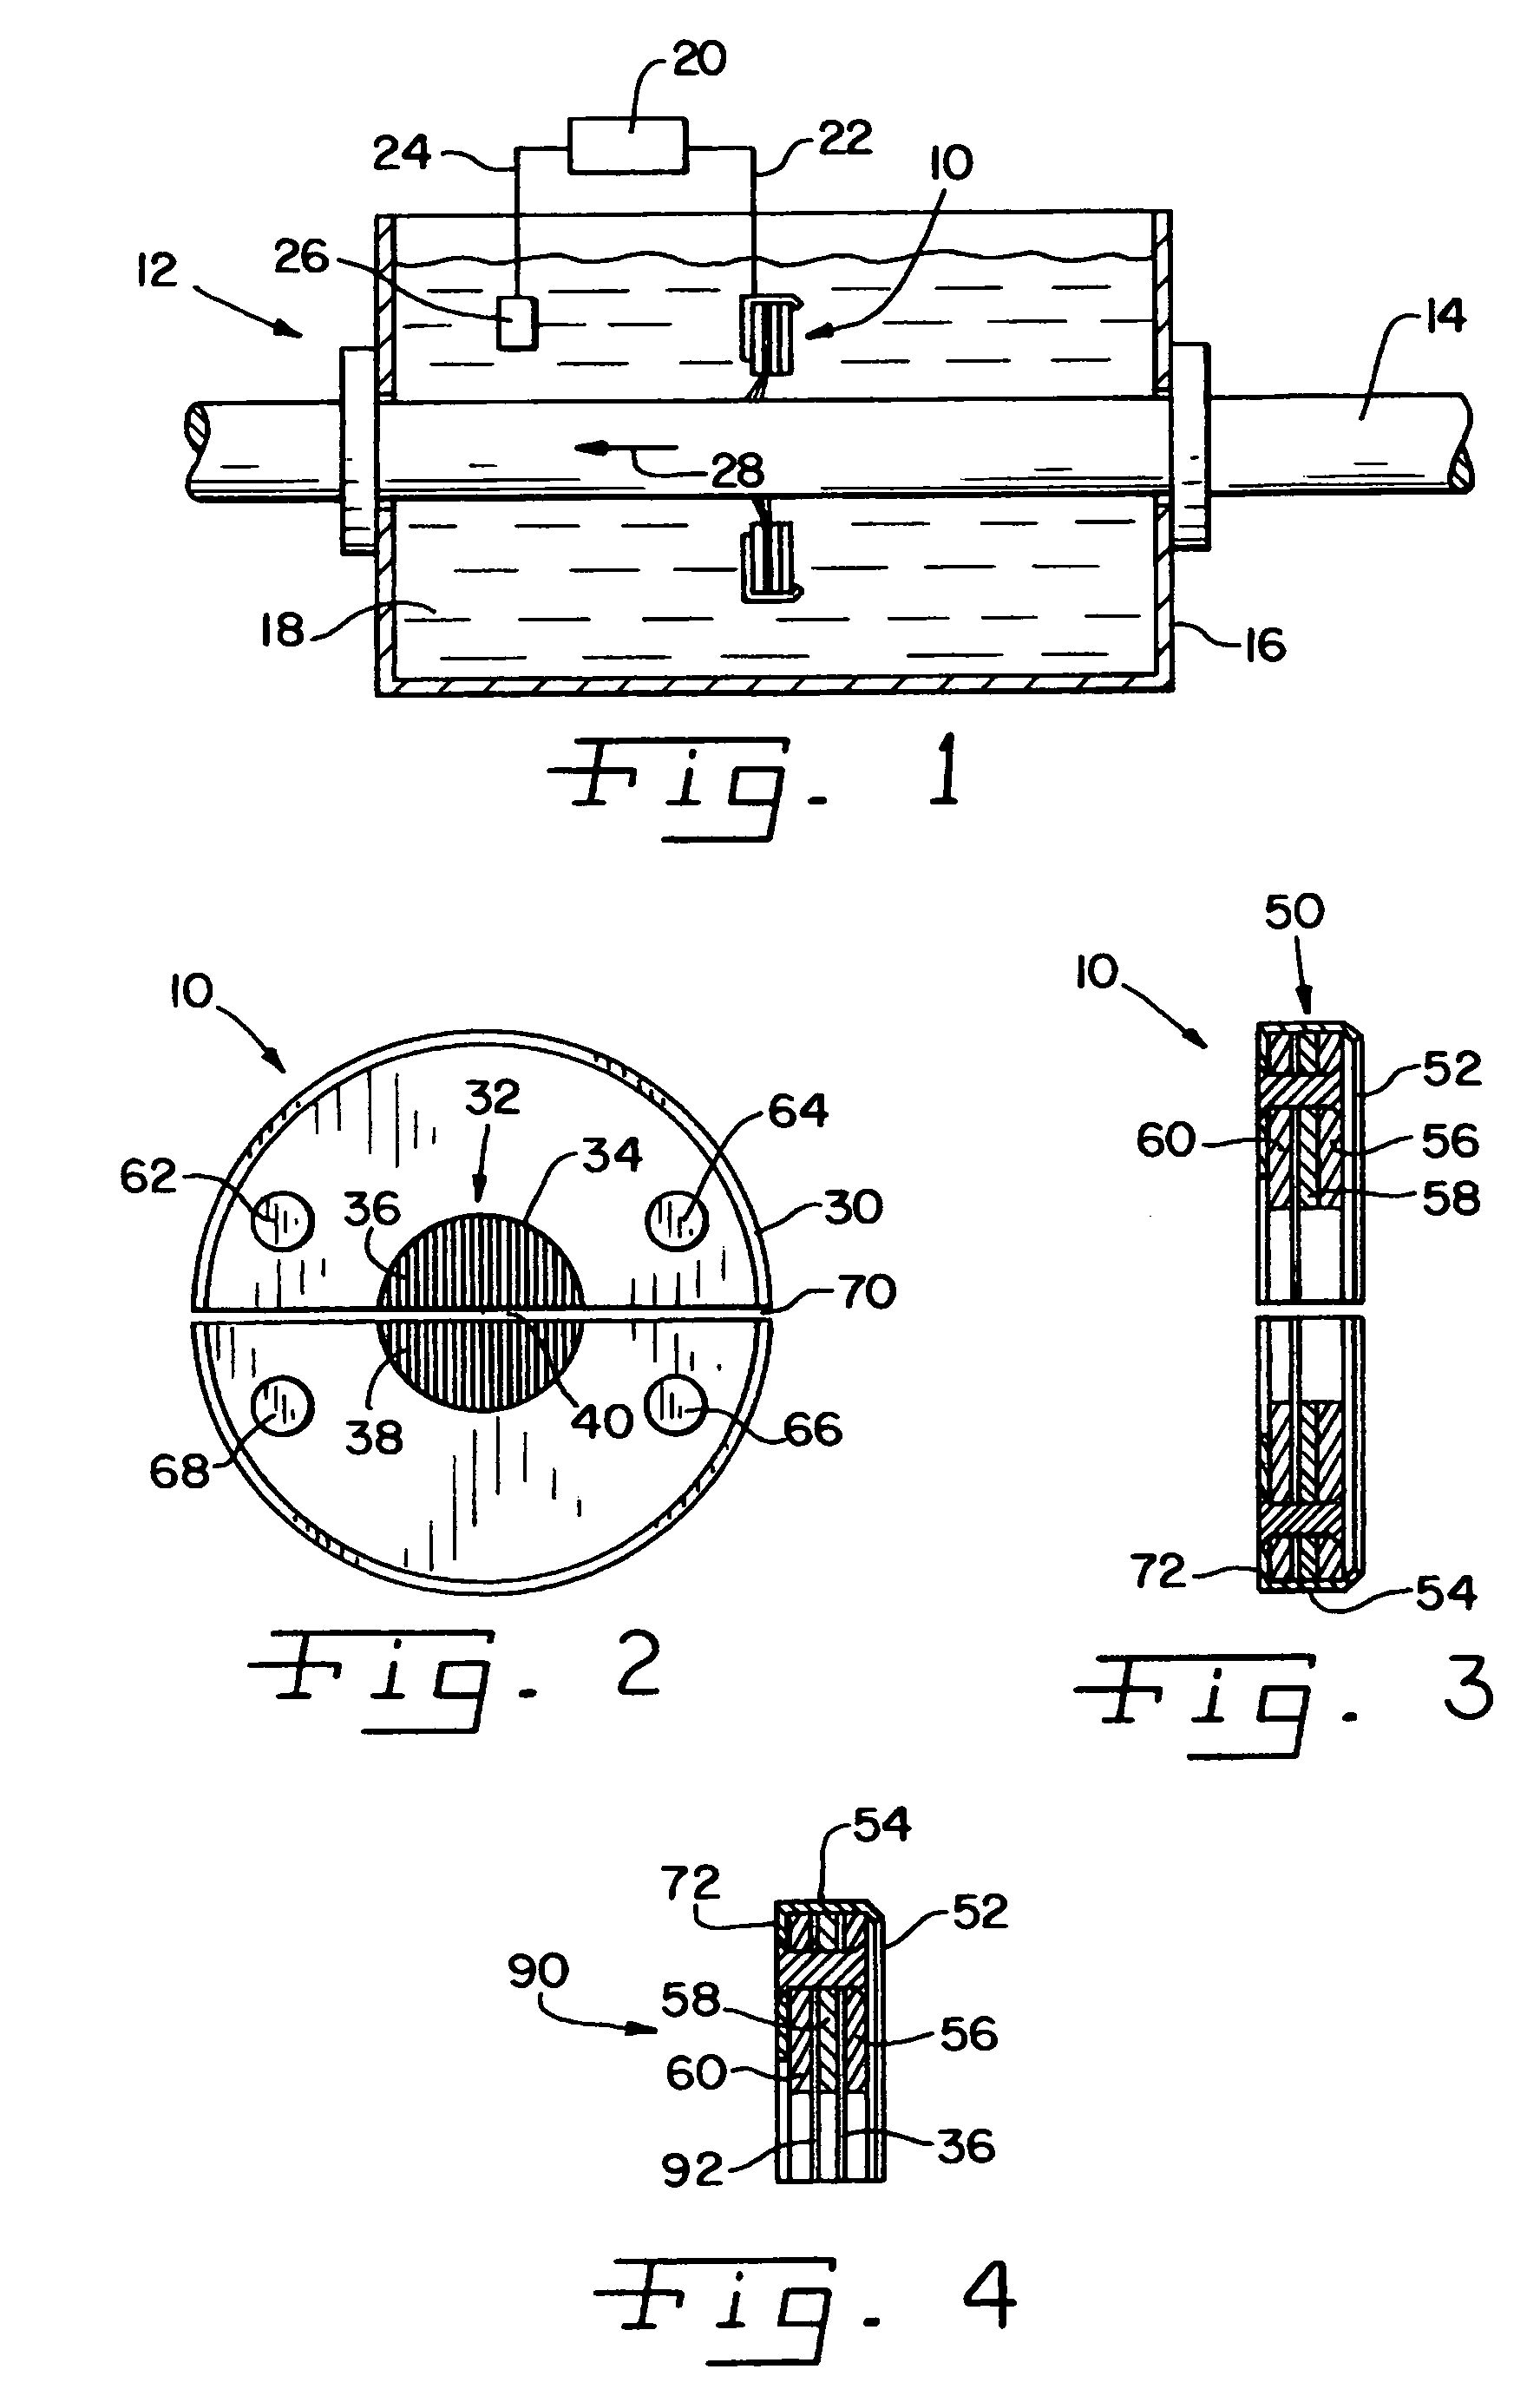 Electrical conductive contact ring for electroplating or electrodeposition